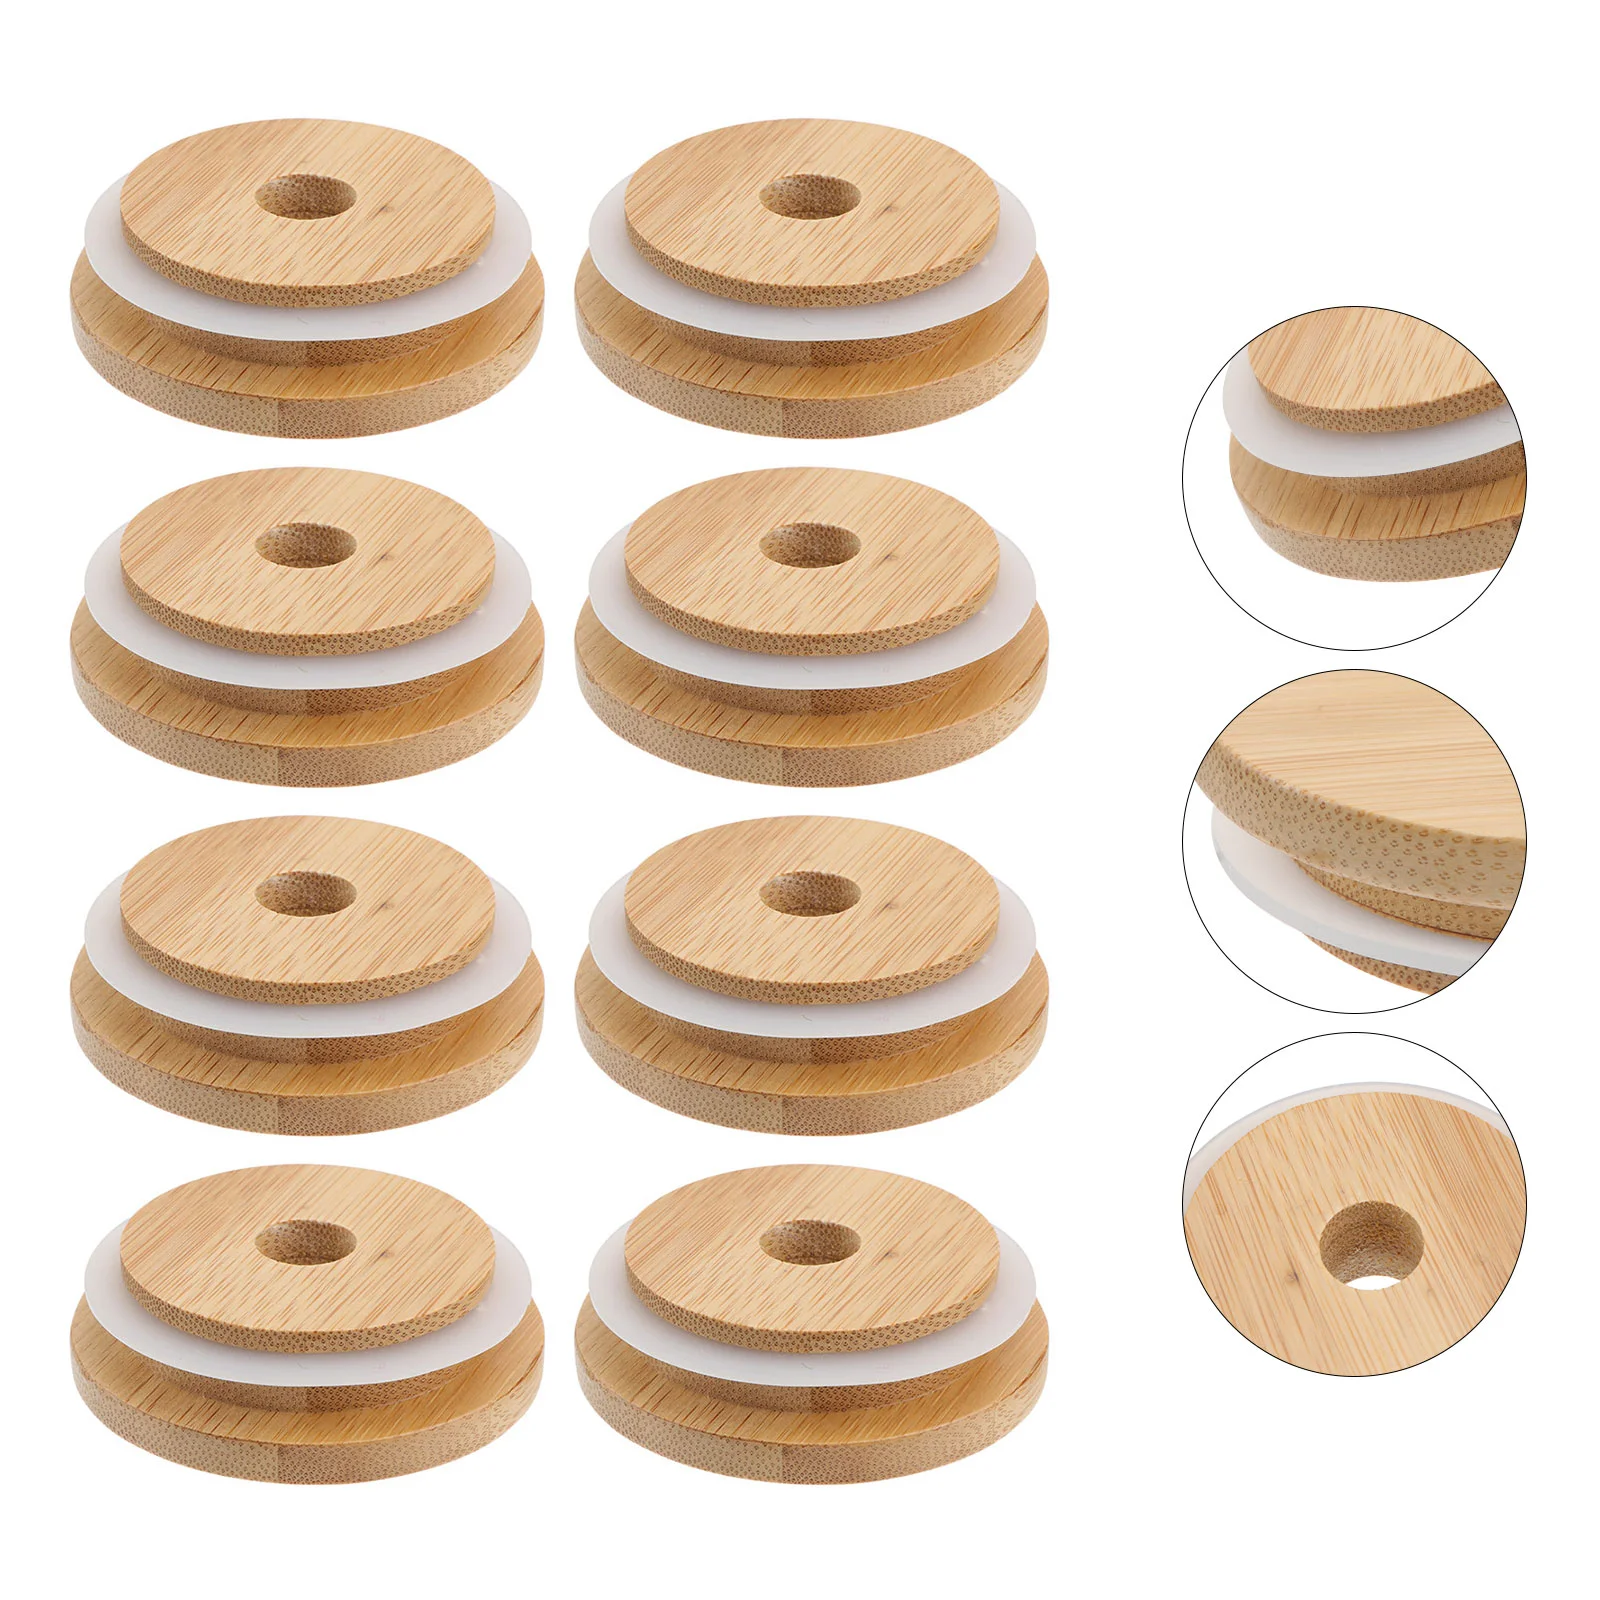 

Lids Jar Mason Lid Straw Can Beer Mouth Wooden Wide Wood Canning Cover Cup Hole Bamboo Bottle Reusable Jars Soda Replacement